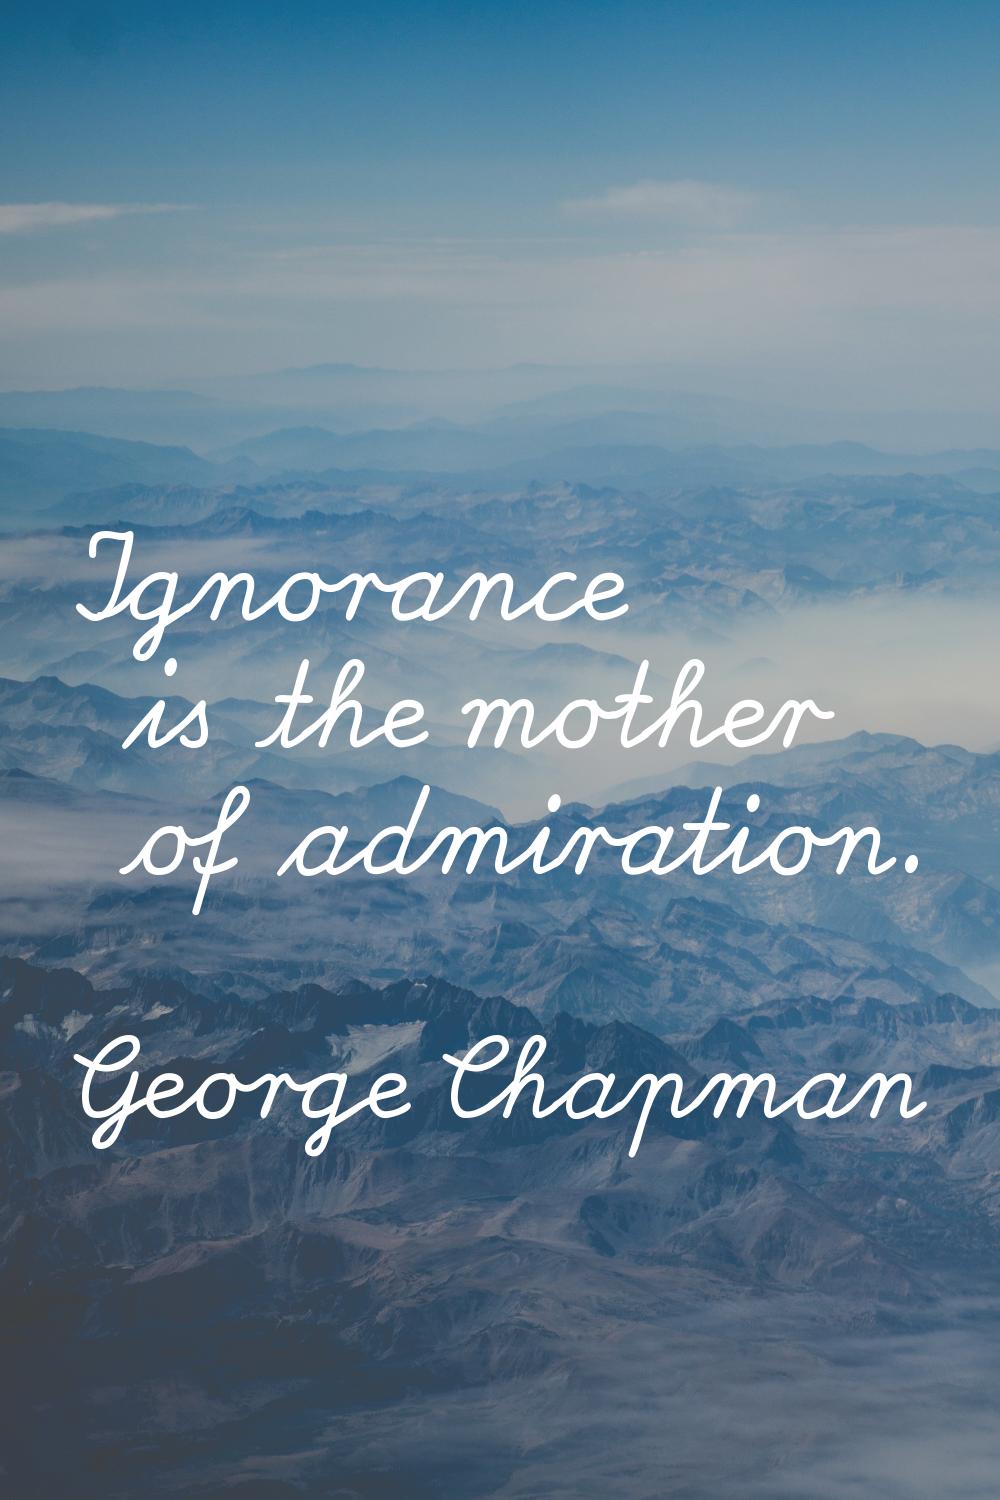 Ignorance is the mother of admiration.